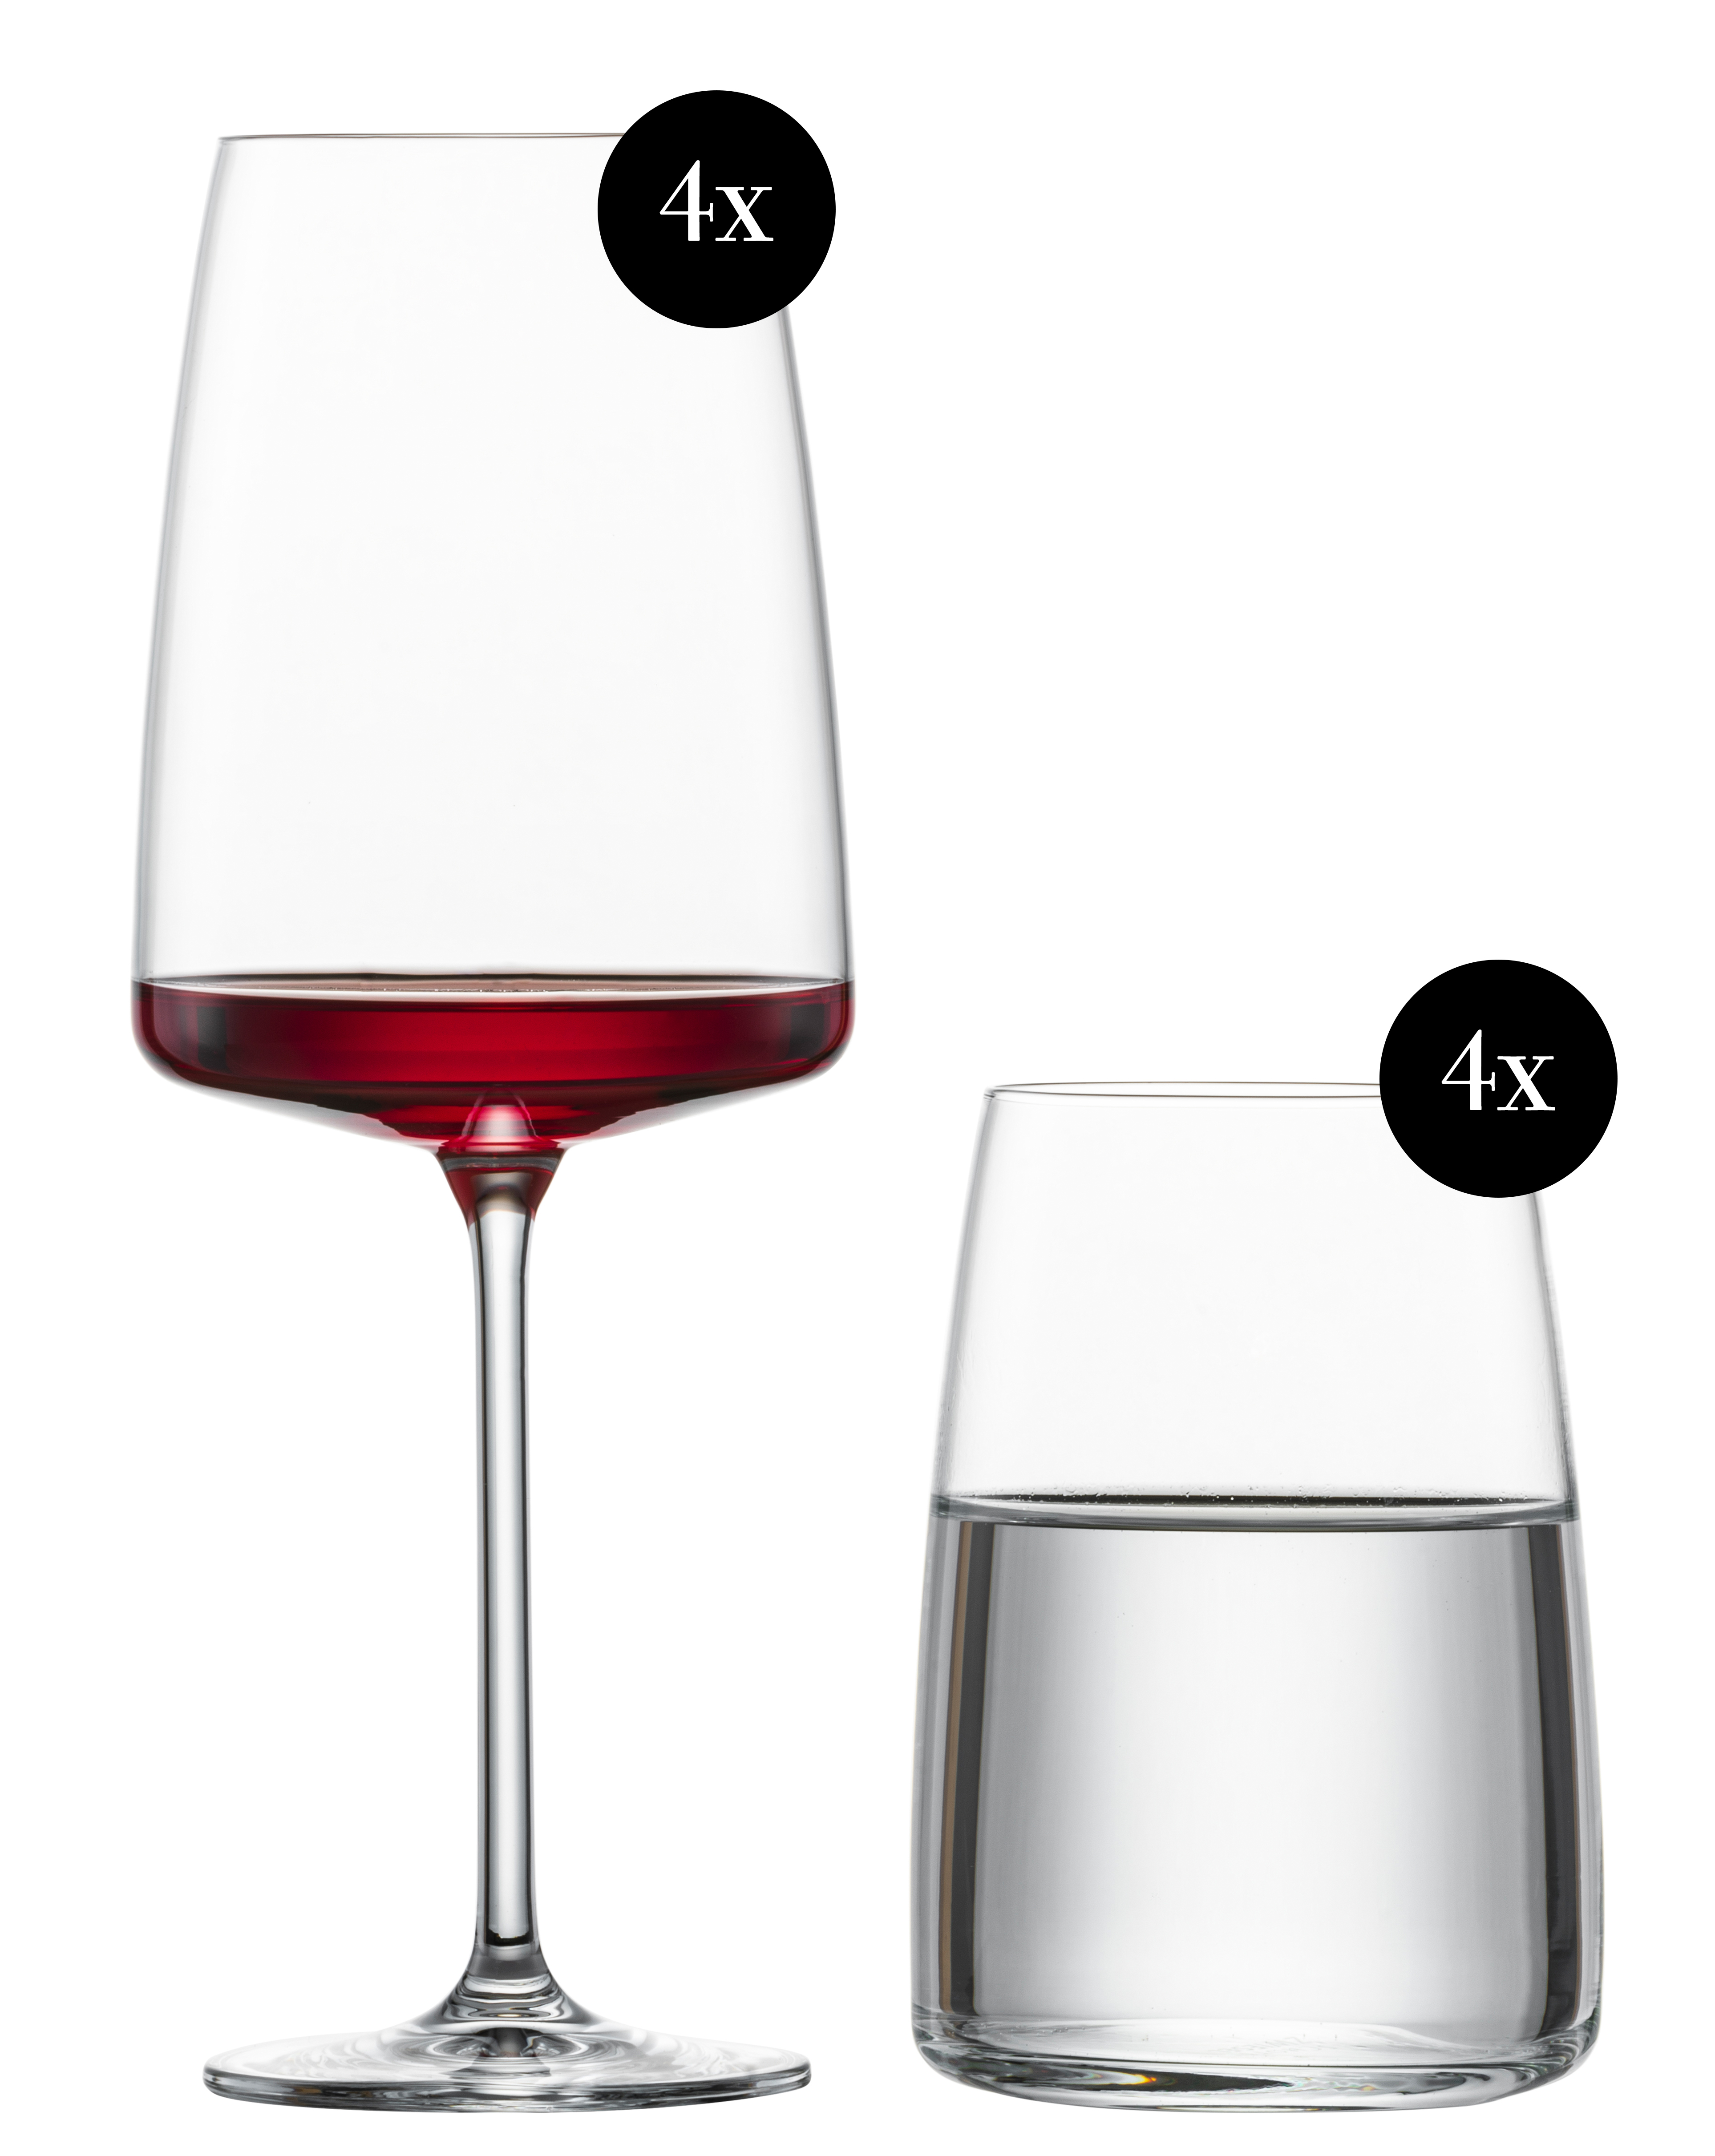 Zwiesel Glas Sensa Mixed Red & White Wine Glasses, Set of 8